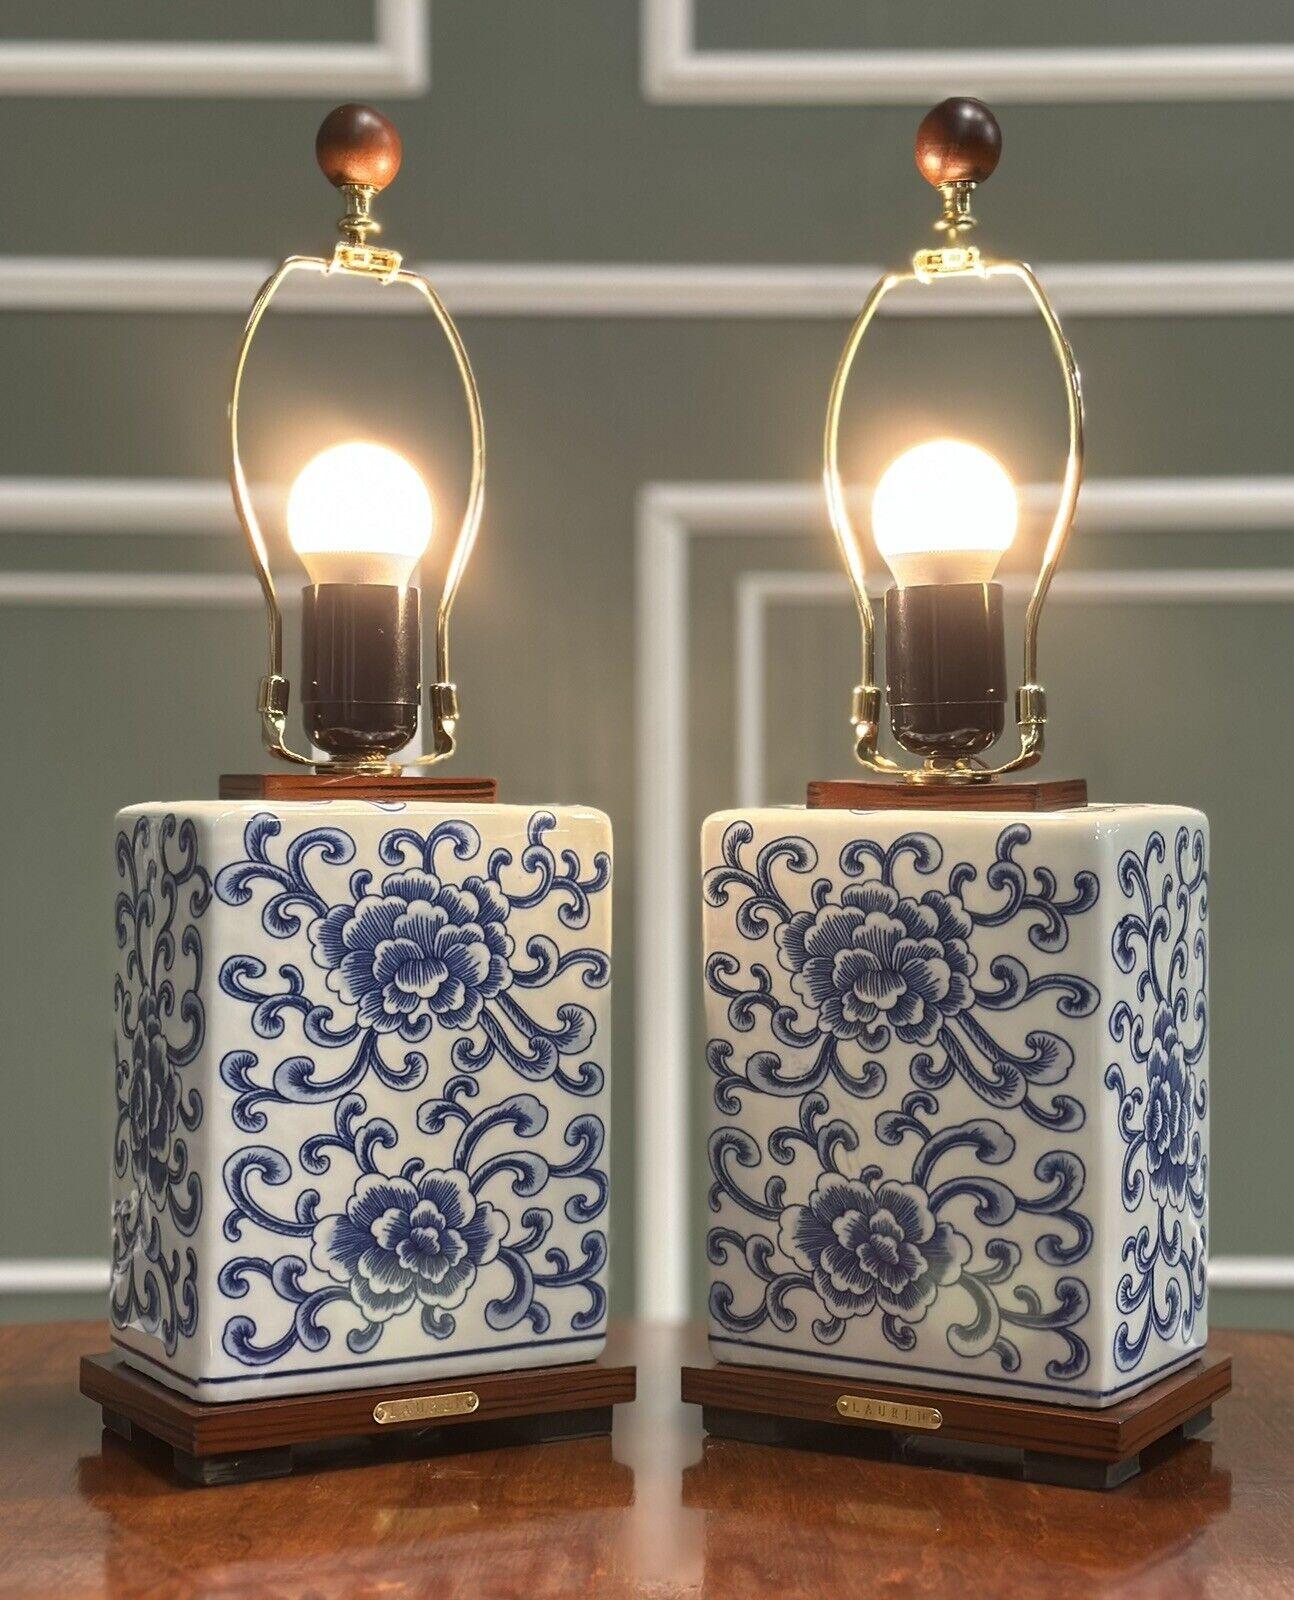 We are delighted to offer this for sale pair of Ralph Lauren Chinese table lamps.

These lamps are totally brand new; they have been removed from the box solely to take pictures. 

They were then reboxed and are ready for transport. They have